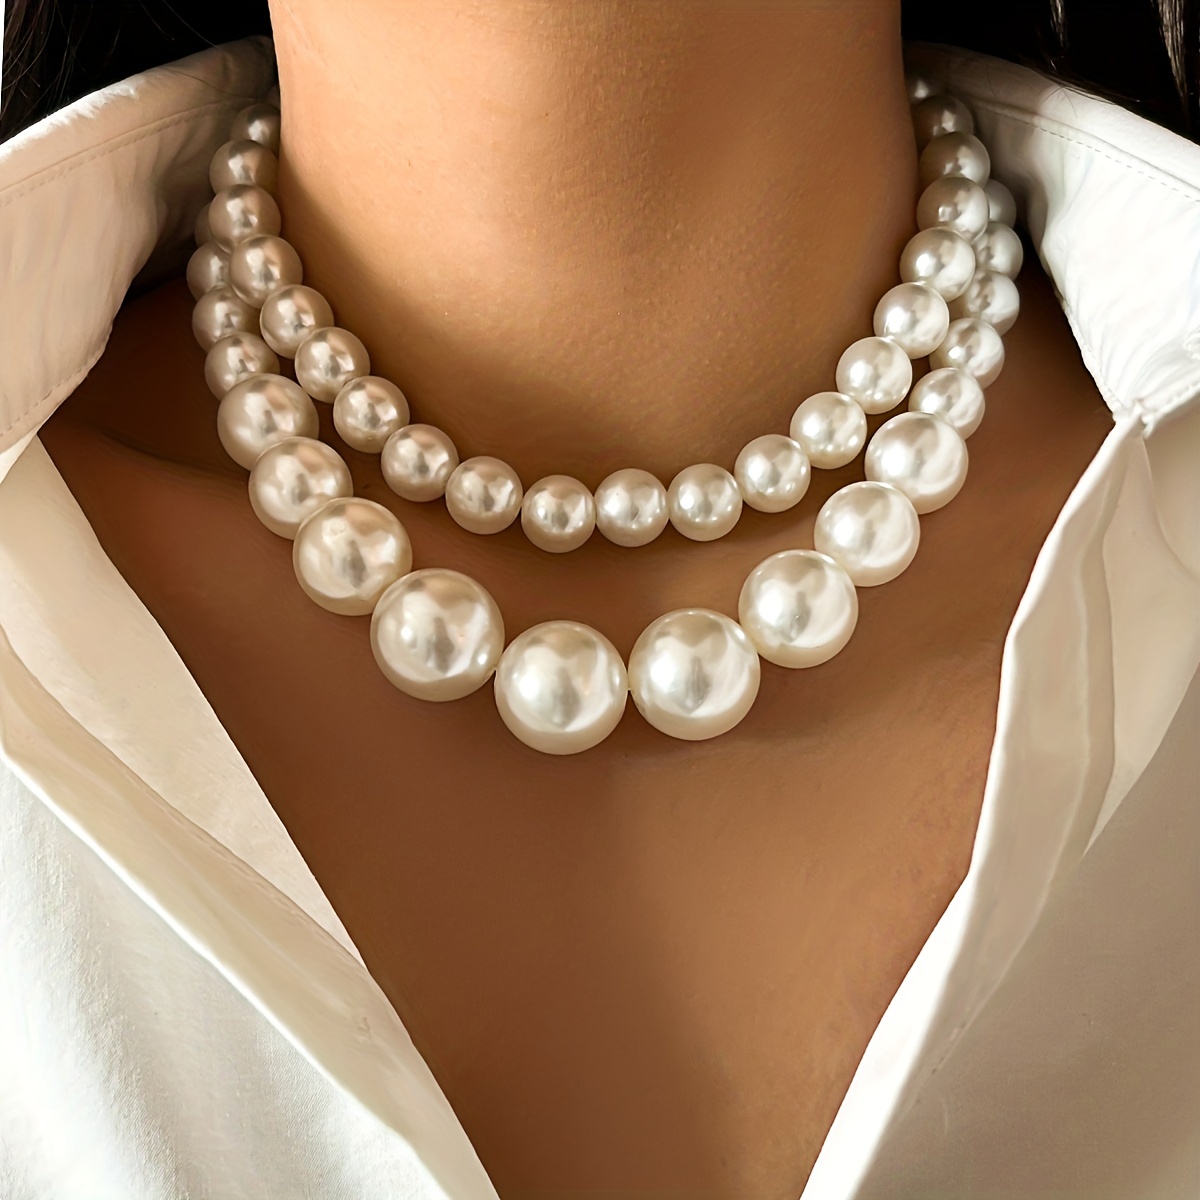 Faux Pearls Beads Necklace Heart Shape Pendant Lovely Neck Jewelry Perfect  For Any Occasion